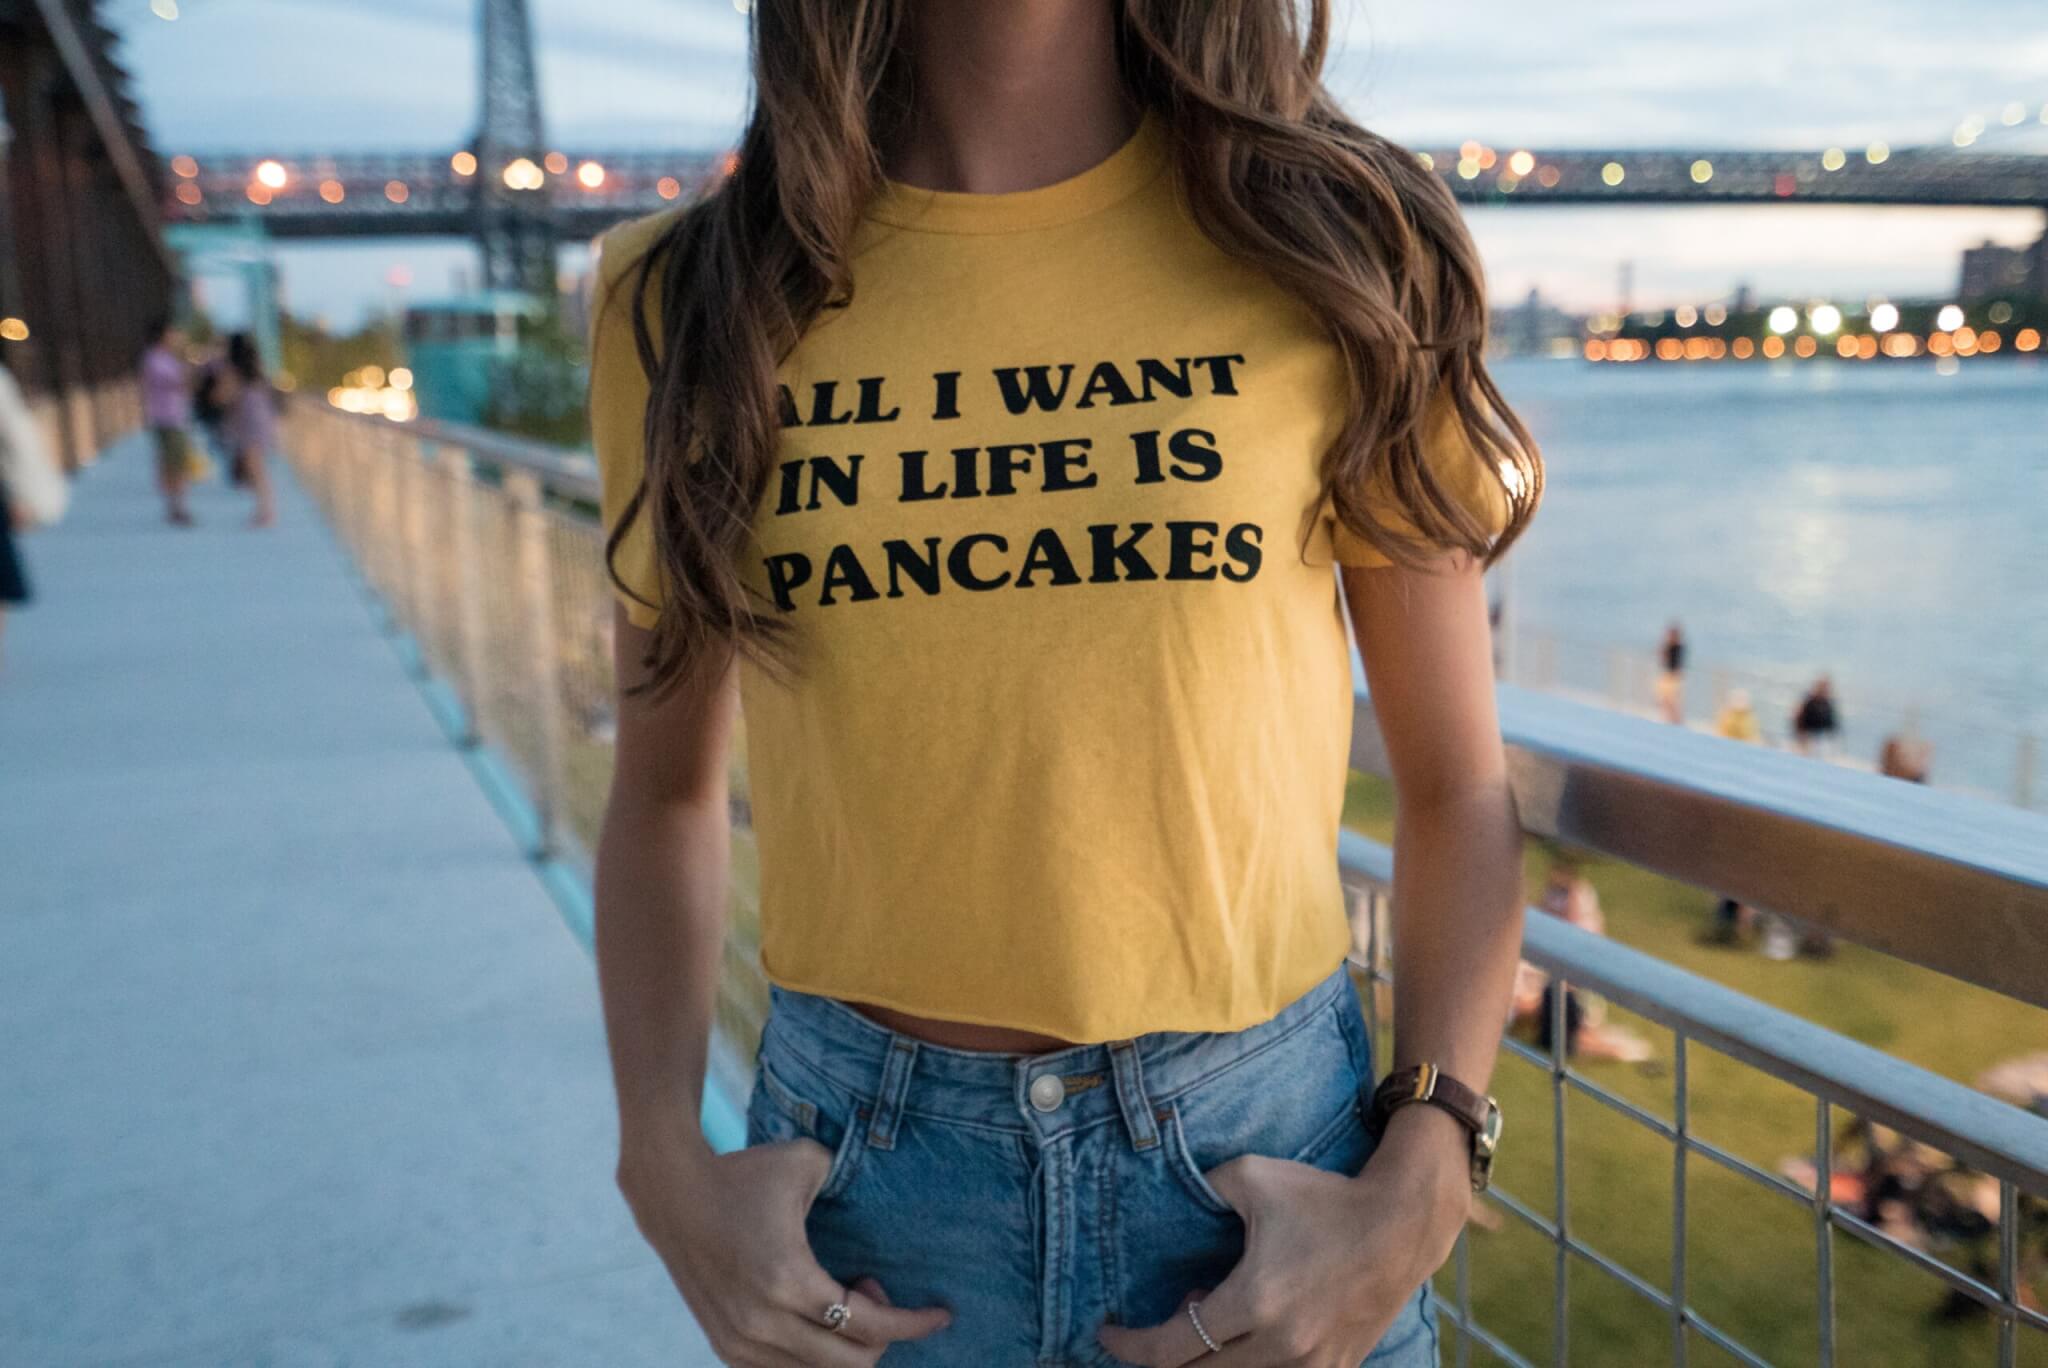 Woman wearing tshirt with pancakes quote